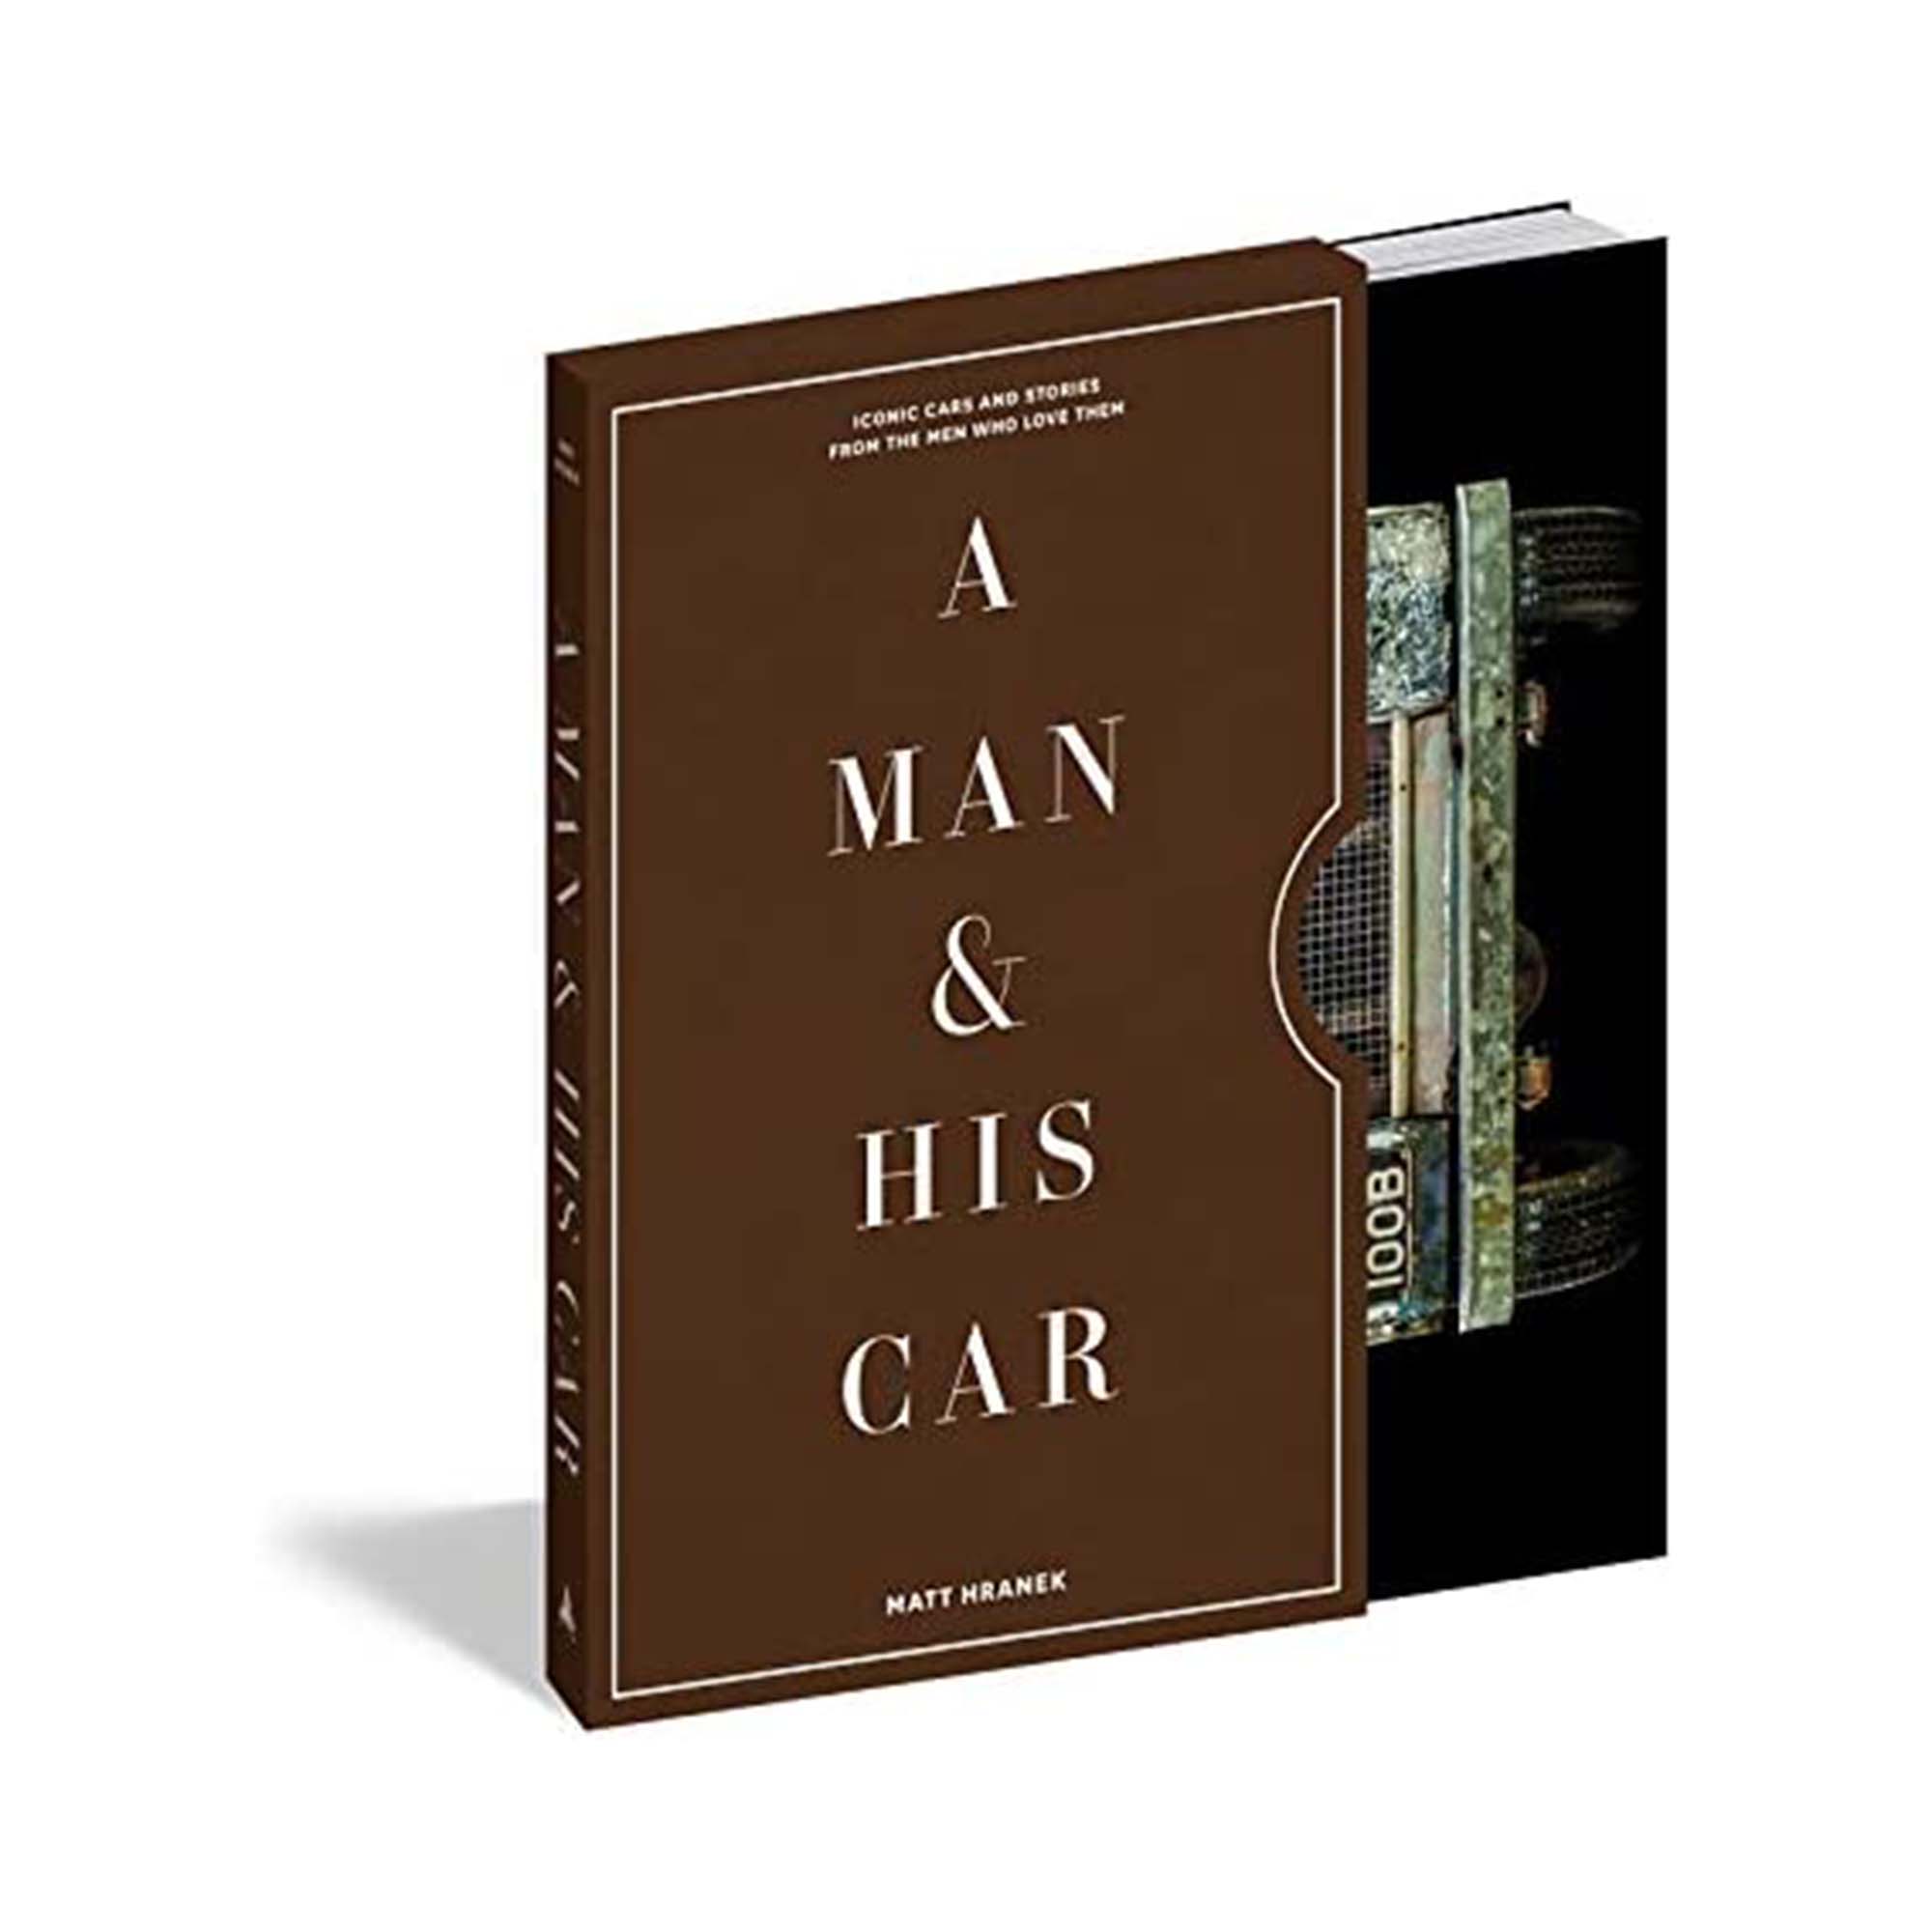 A Man & His Car: Iconic Cars and Stories from the Men Who Love Them - Hardcover